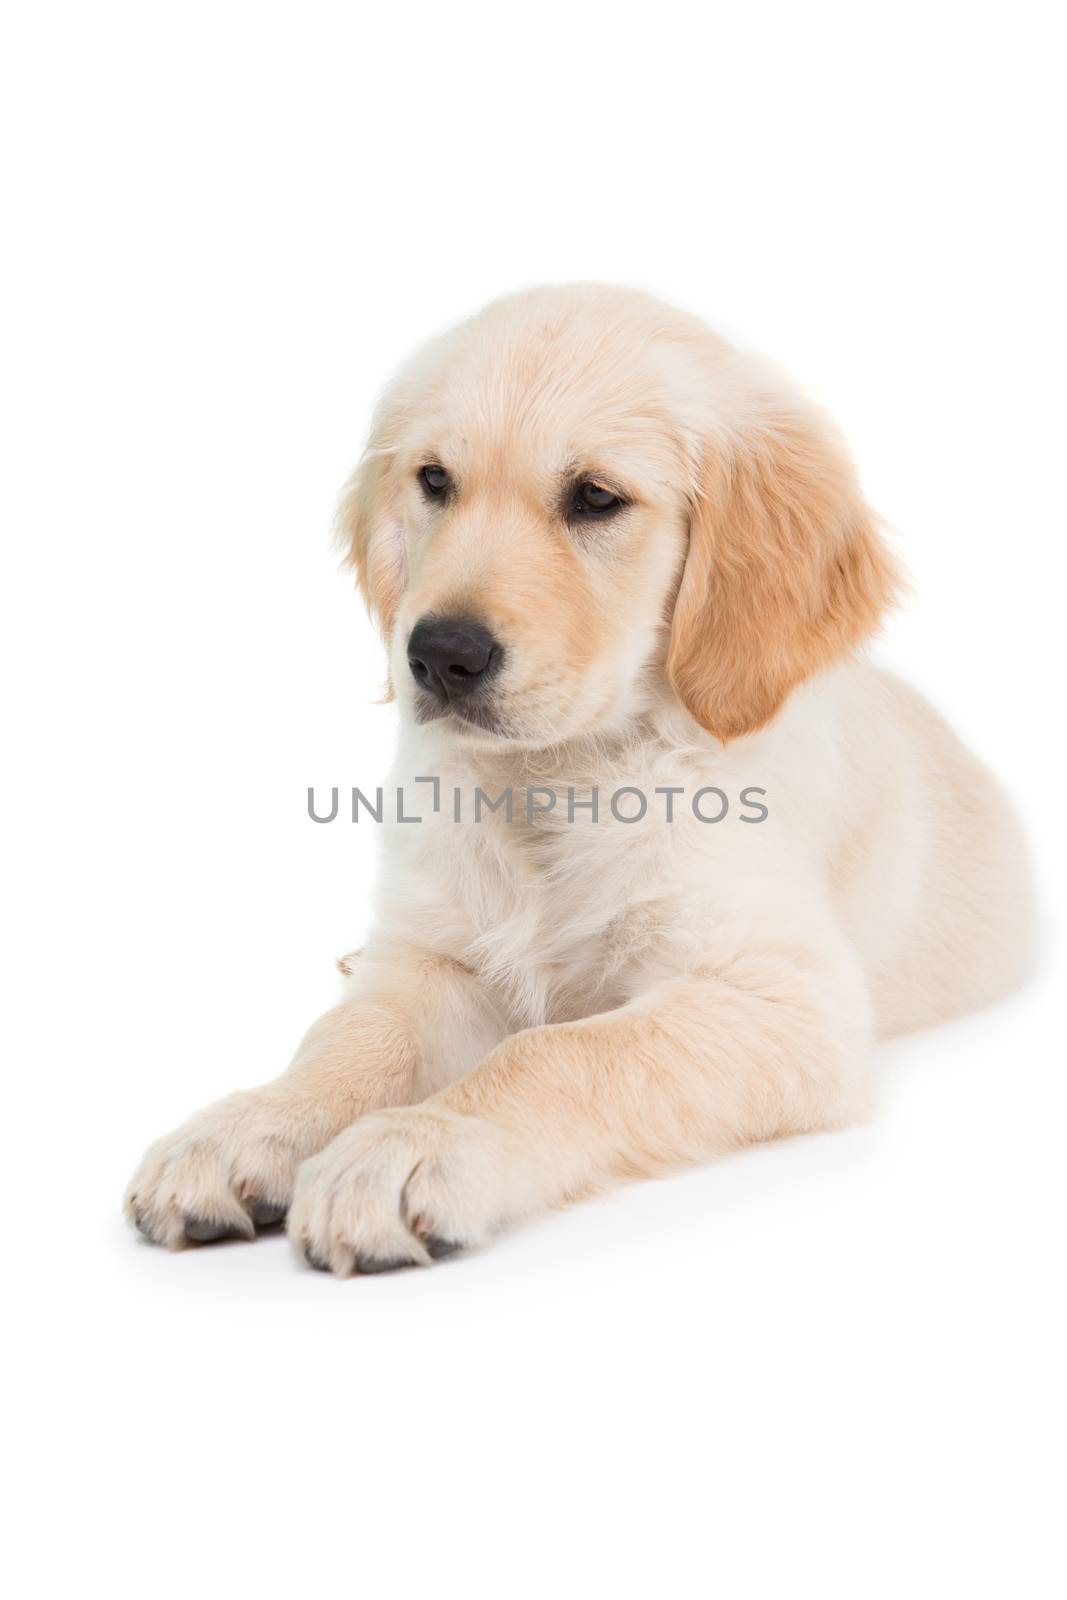 Lying dog looking ahead on white background